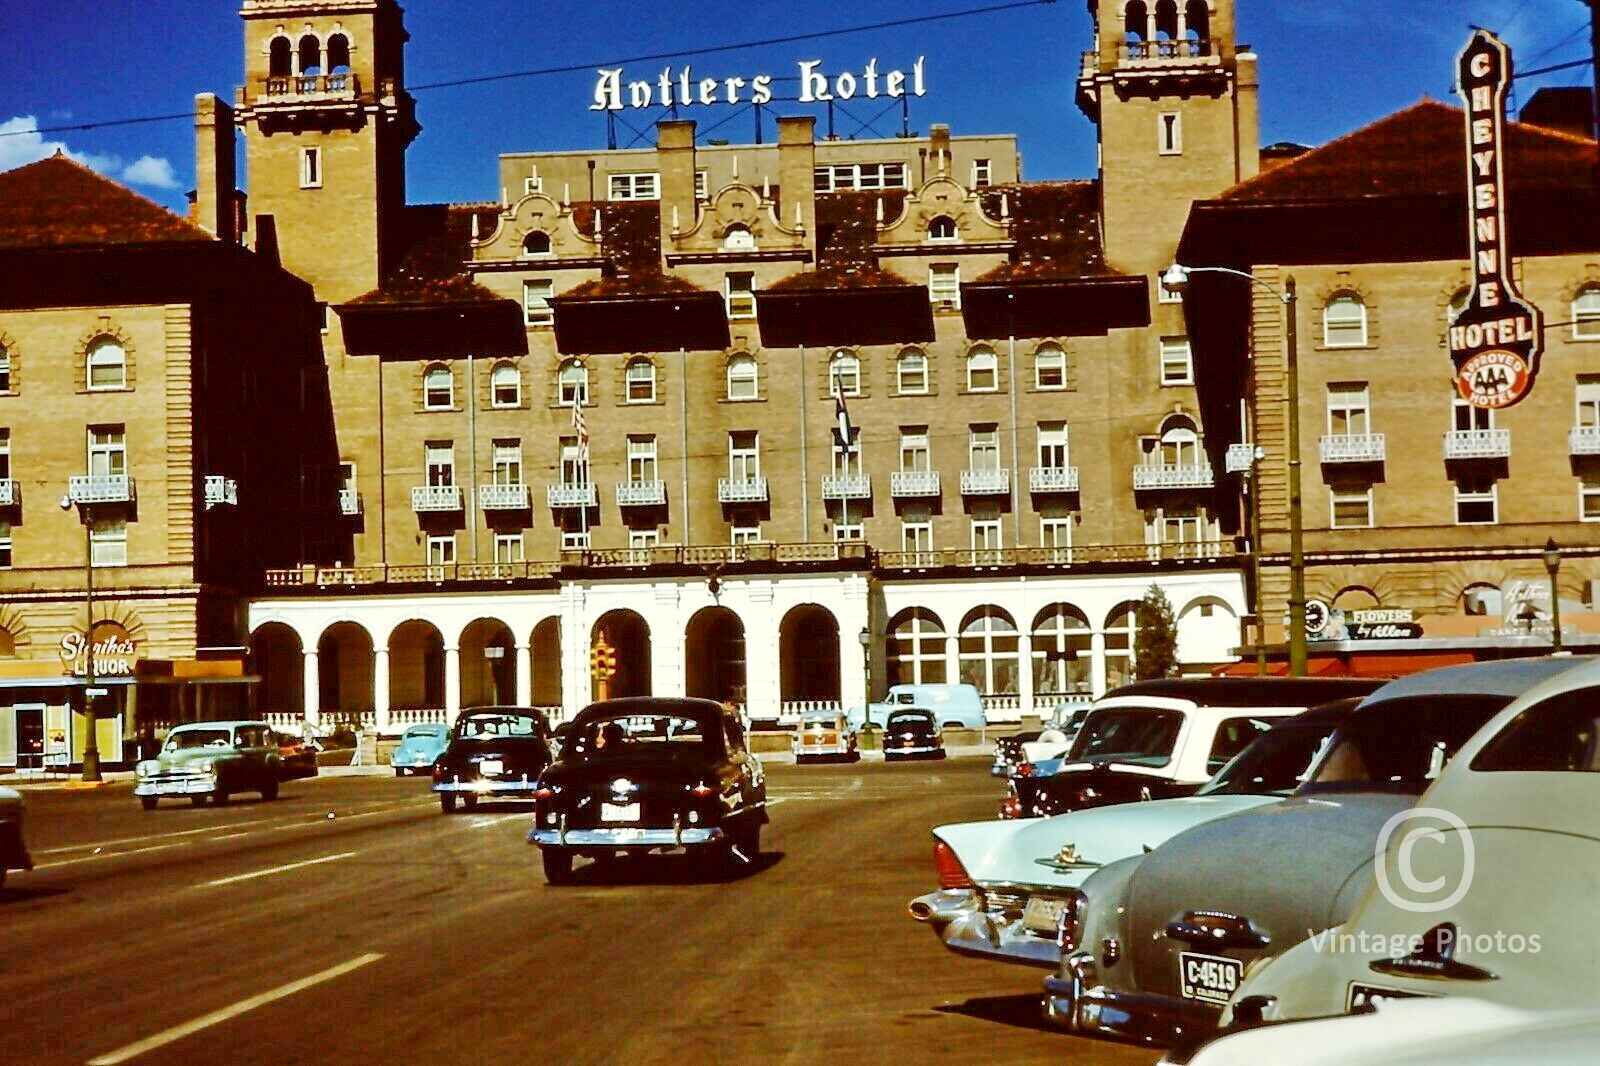 1960s Antlers Hotel Colorado Springs, Colorado with Classic Cars